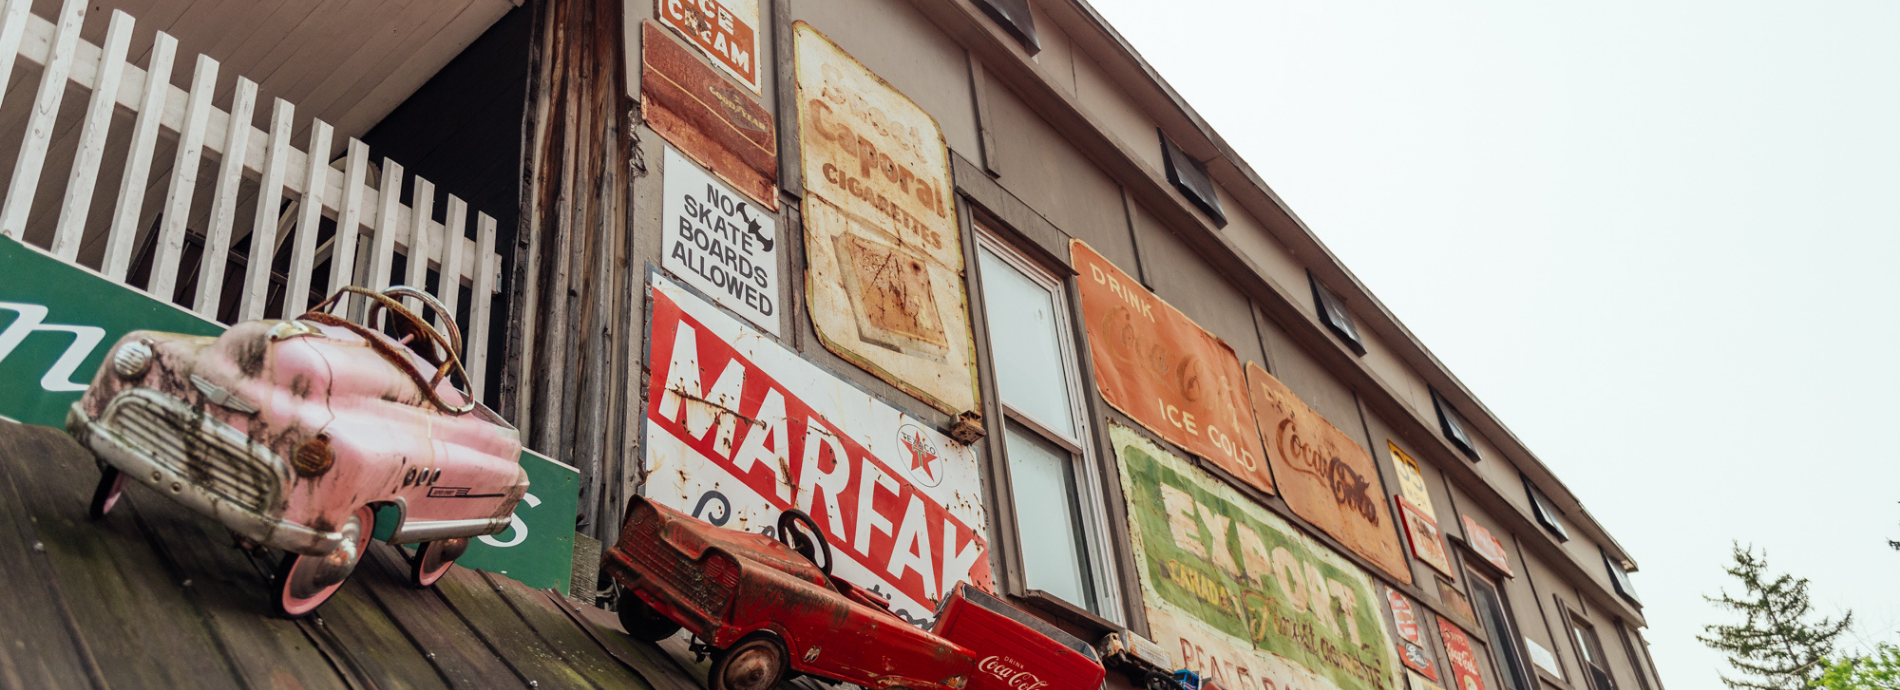 antique signs affixed to a building